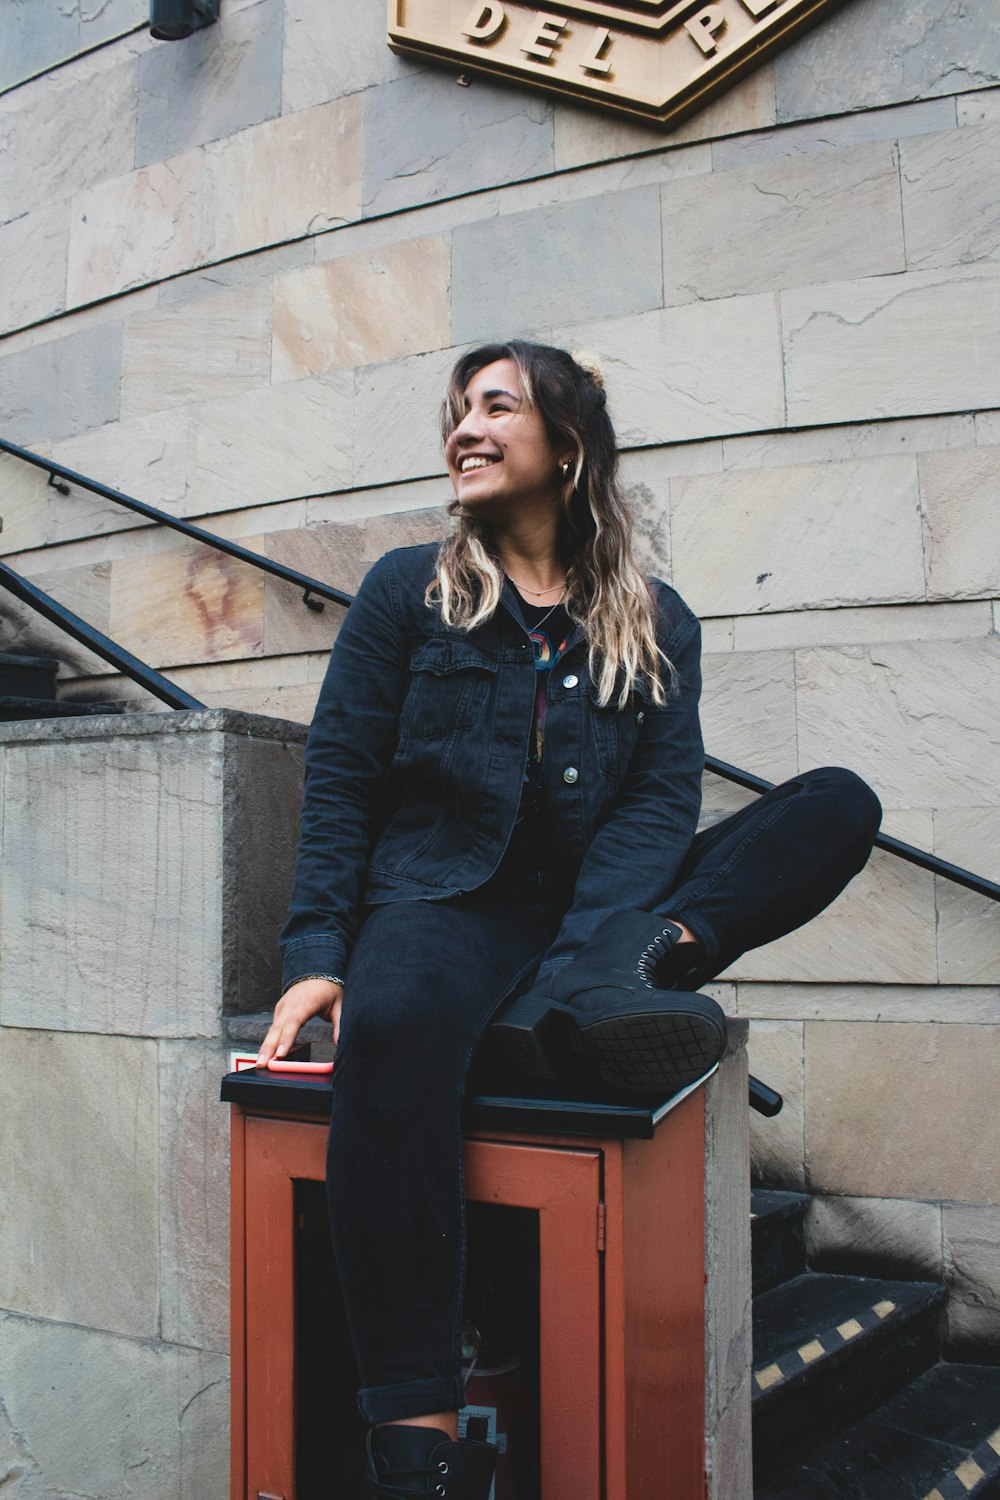 smiling woman in blue jacket and black denim jeans sitting on top of brown wall mounted box